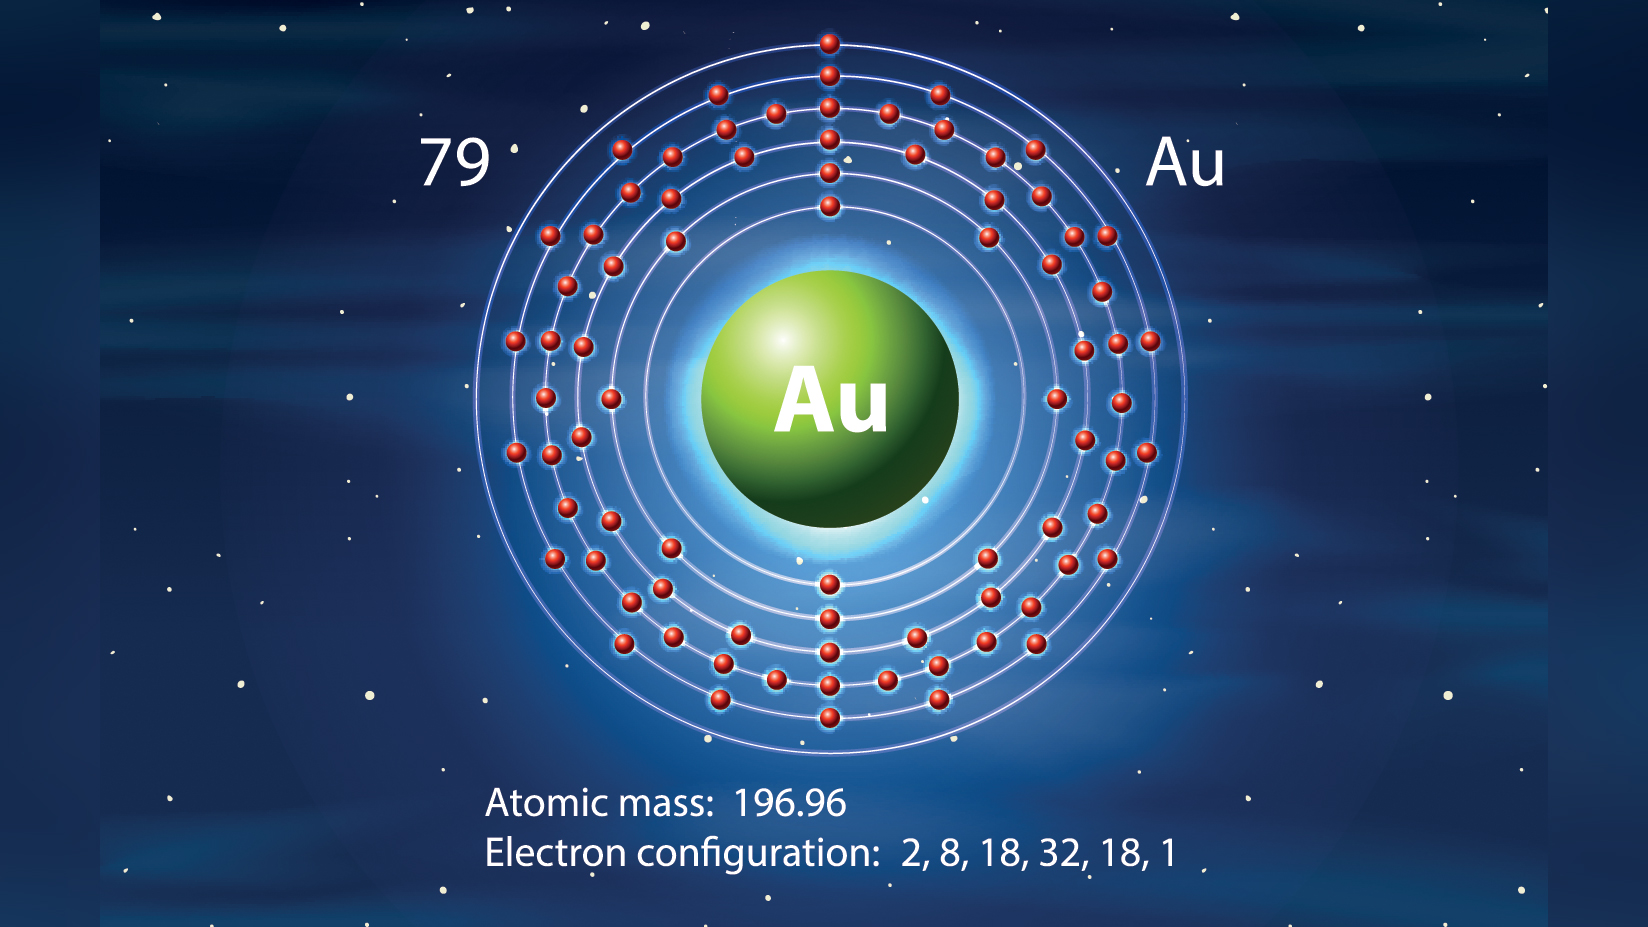 A diagram showing the atomic structure of the chemical element gold.